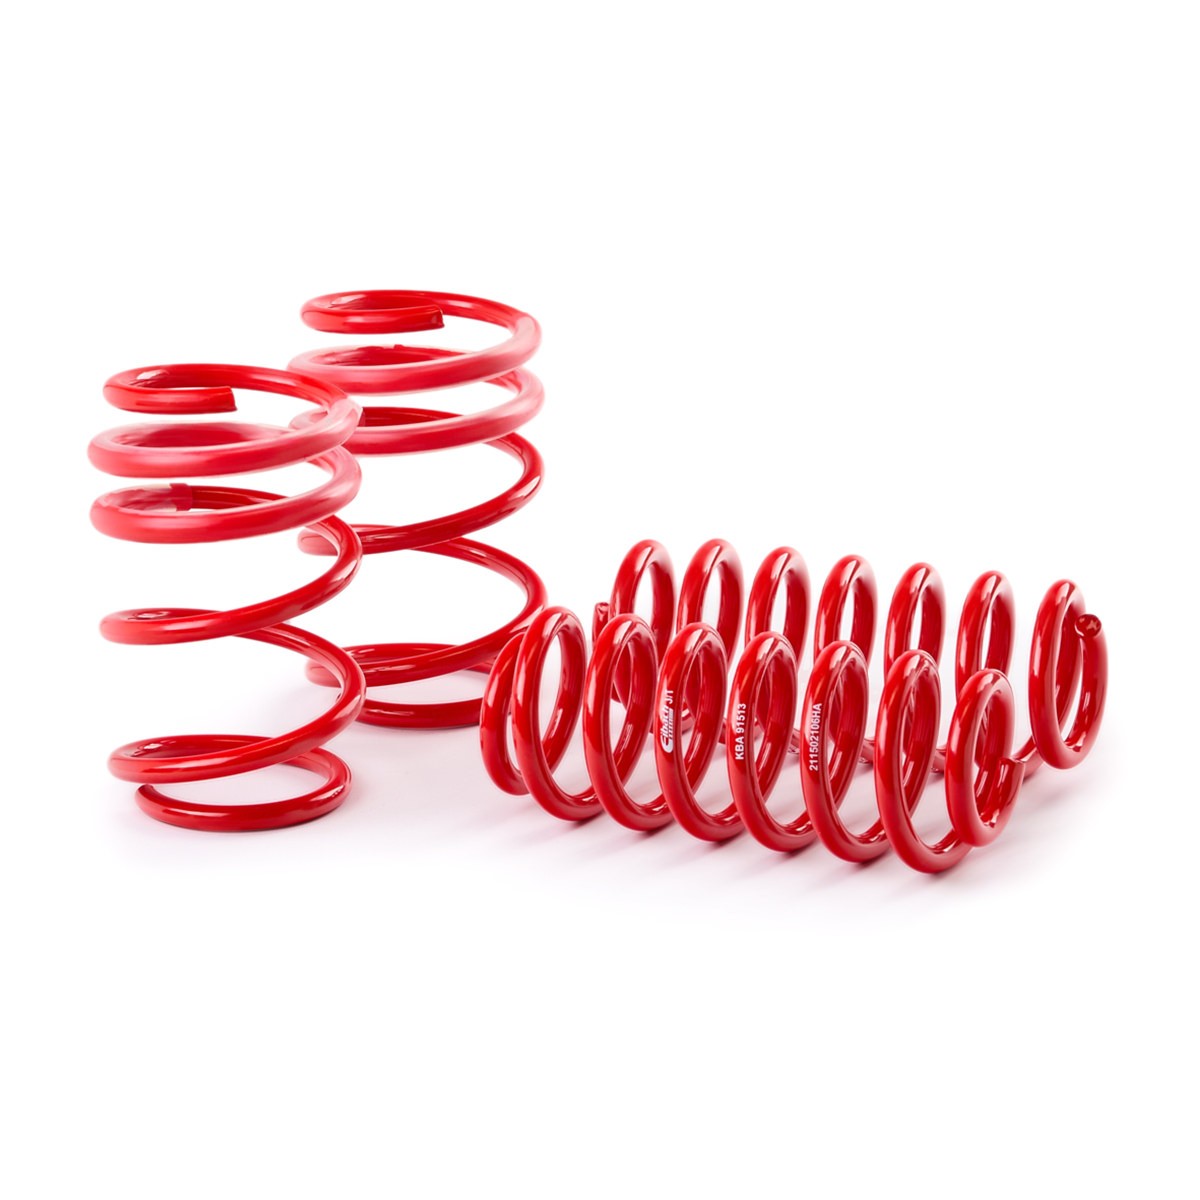 Suspension Kit, coil springs EIBACH E20-15-021-06-22 - Tuning spare parts order